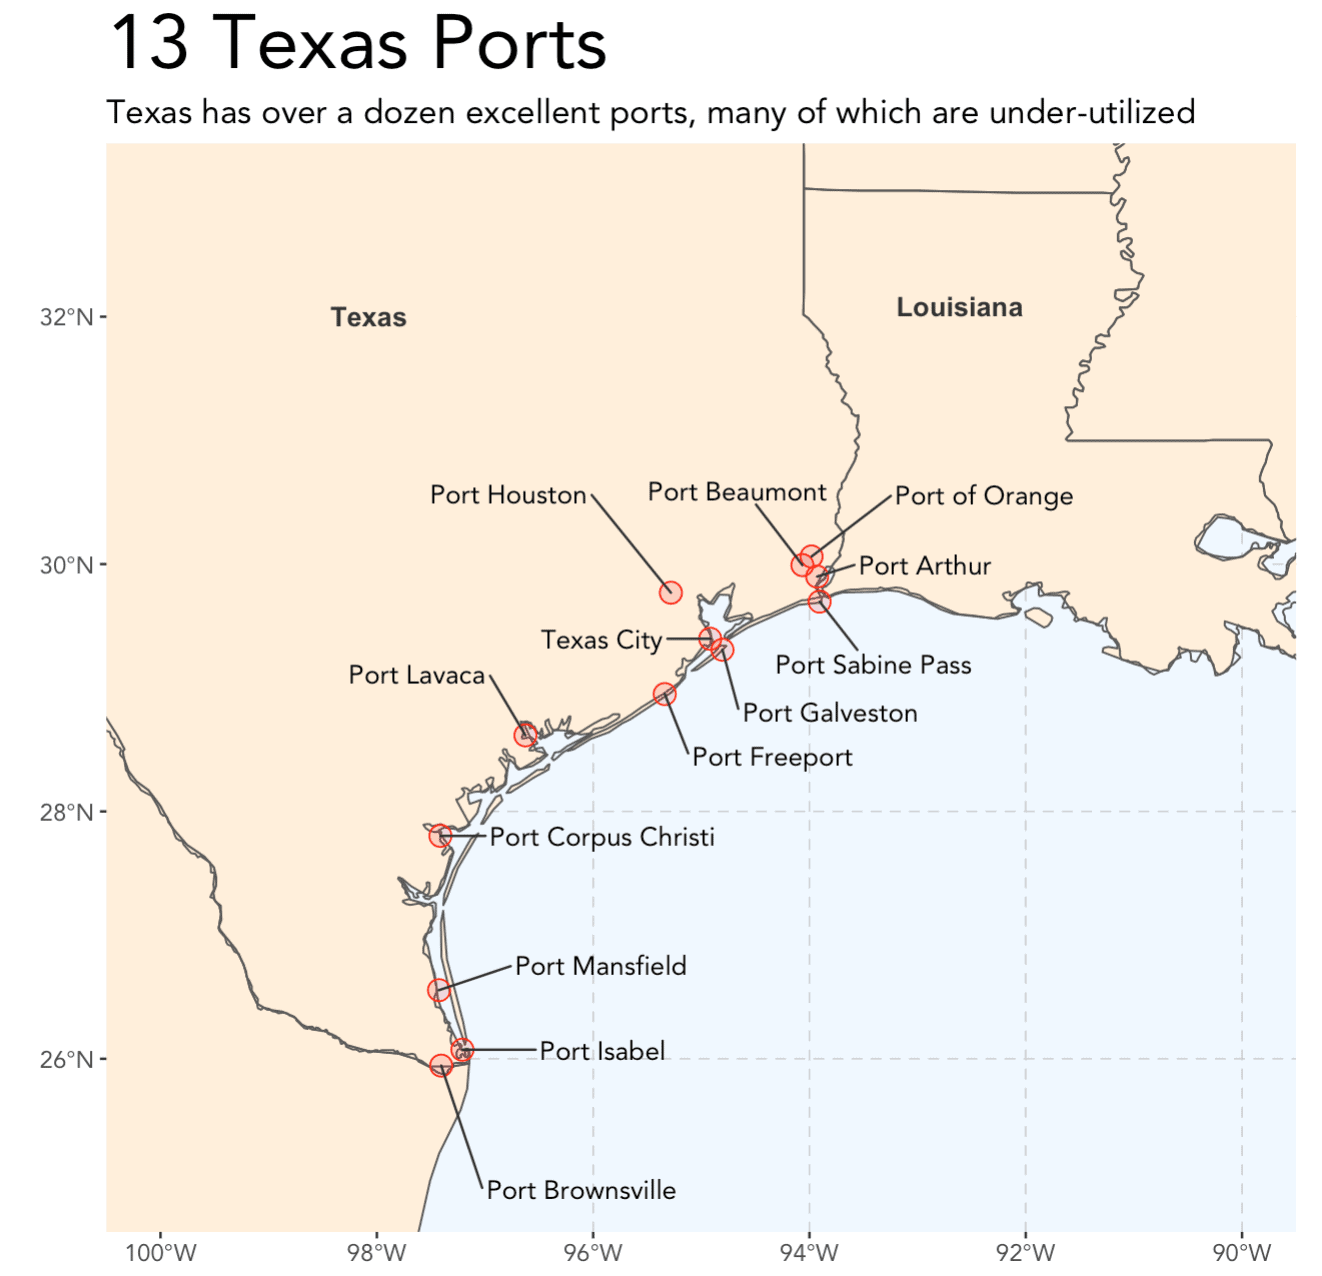 A finalized map made with R and ggplot2 that shows 13 Texas ports with labels.